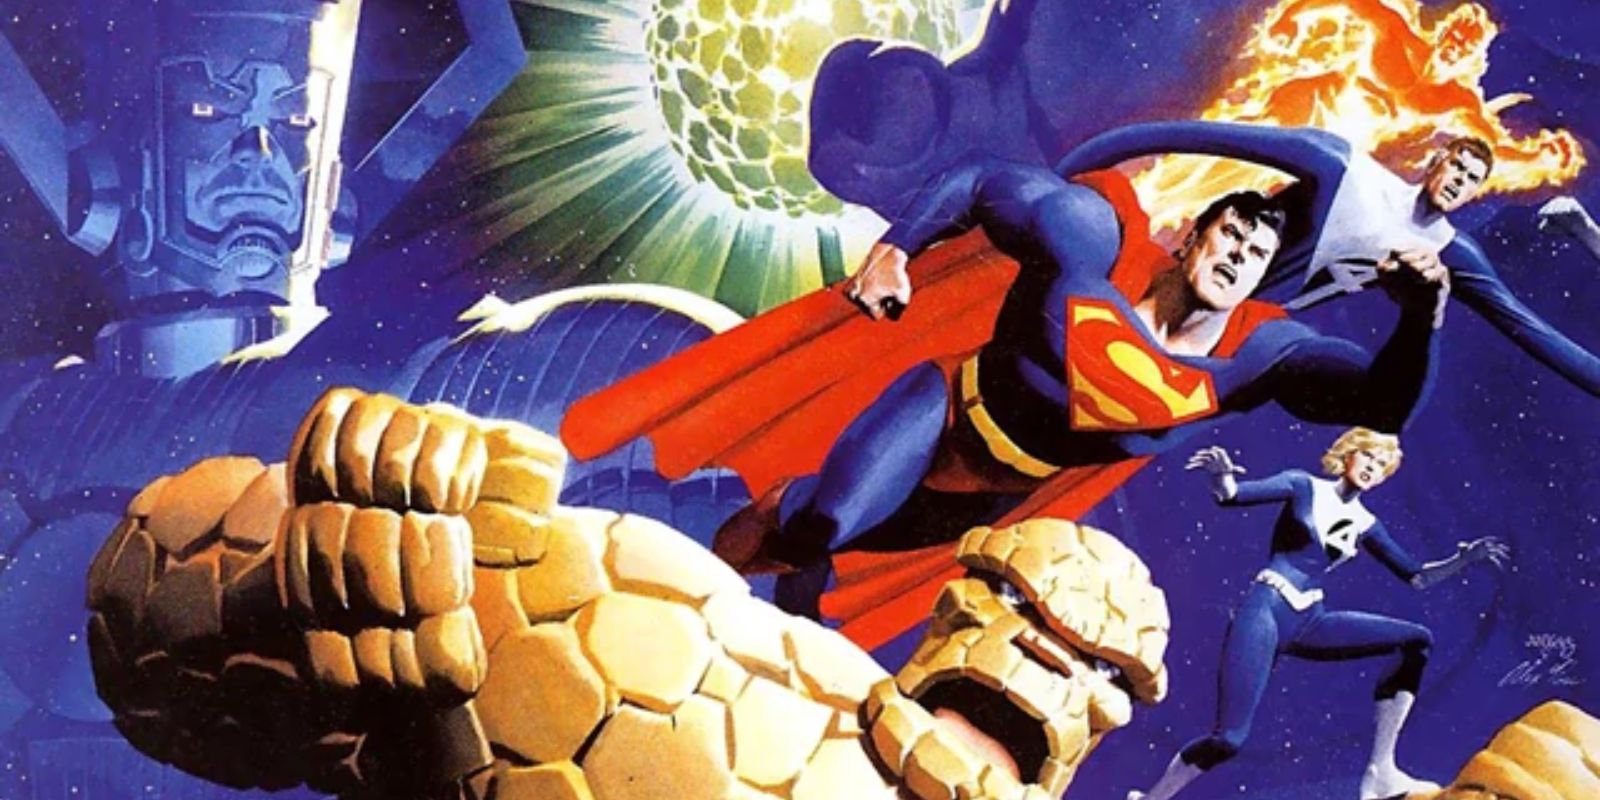 The cover for Superman/Fantastic Four depicts the Fantastic Four and Superman heading into battle.